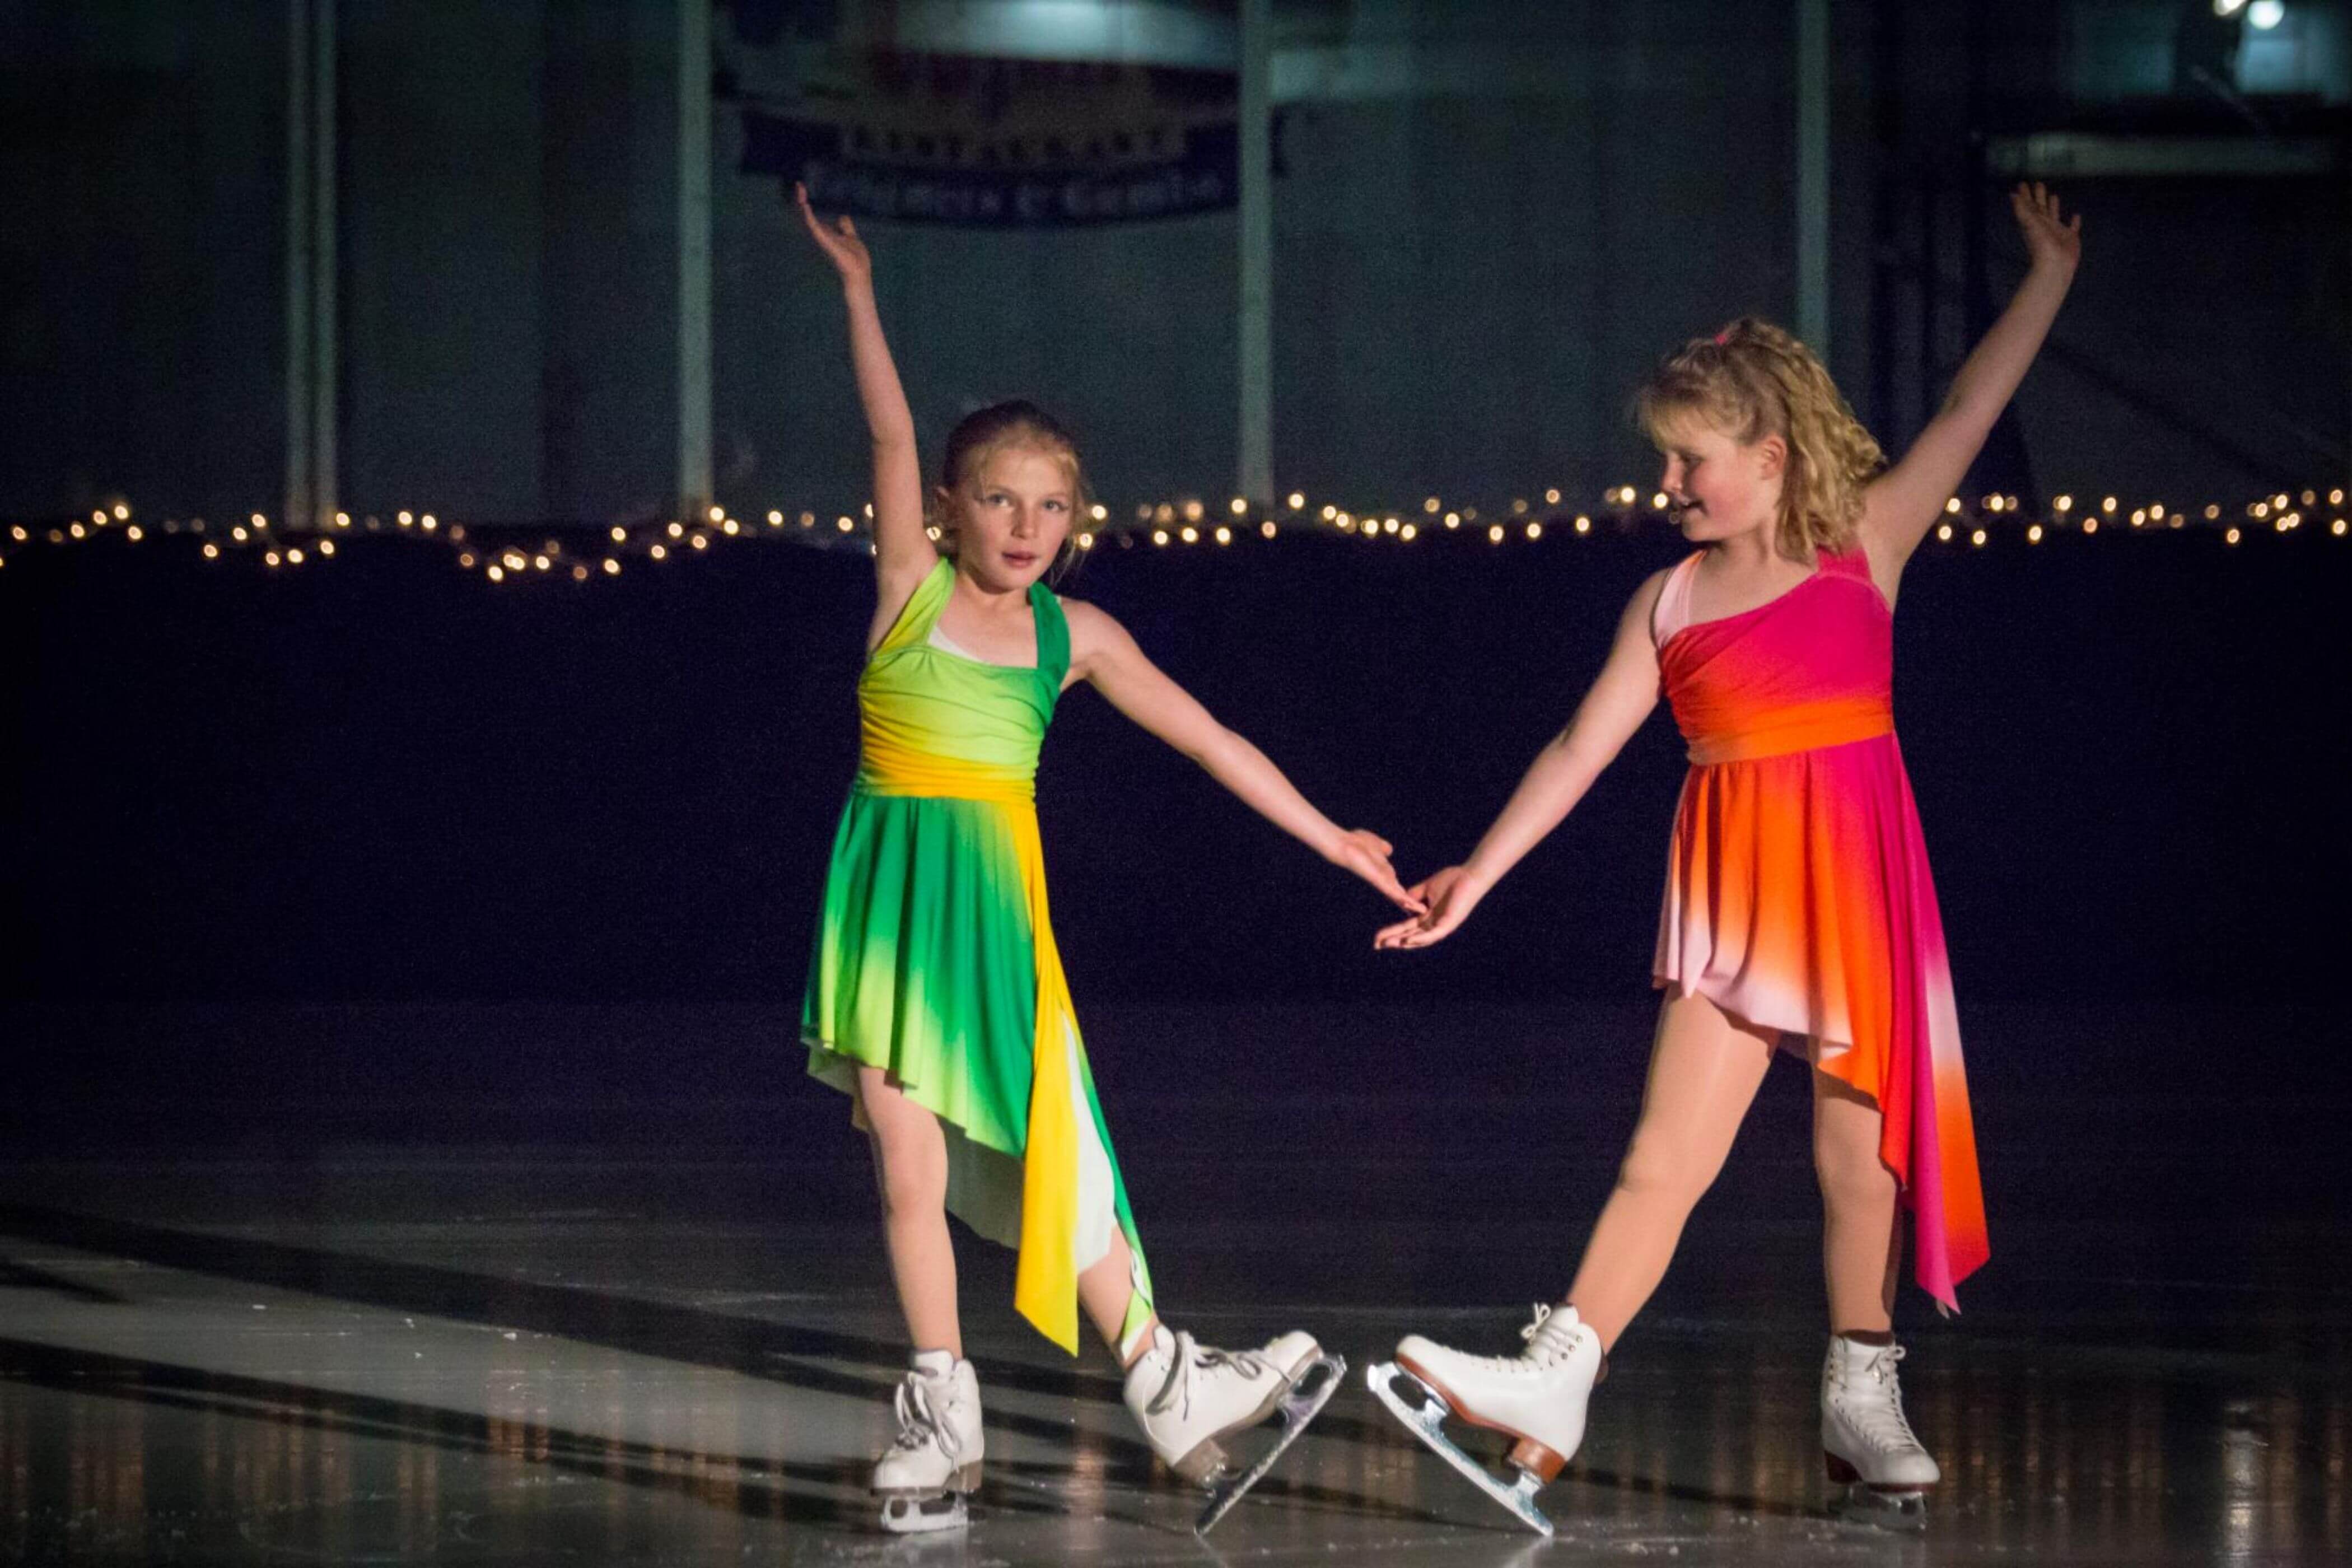 Two young female ice sakters. The left wears a yellow and green leotard. The right wears a red and yellow leotard